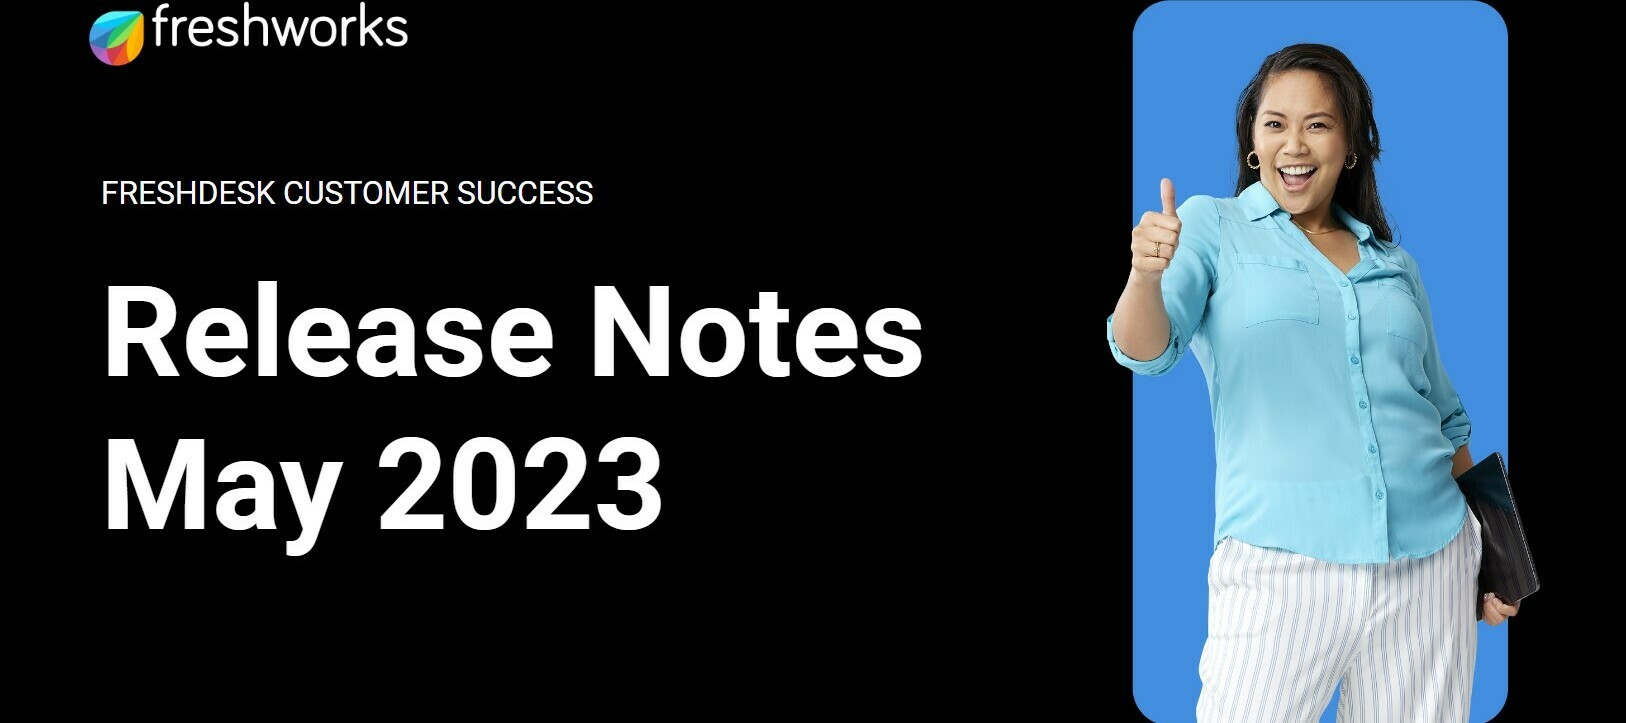 Freshdesk Customer Success Release Notes - May 2023